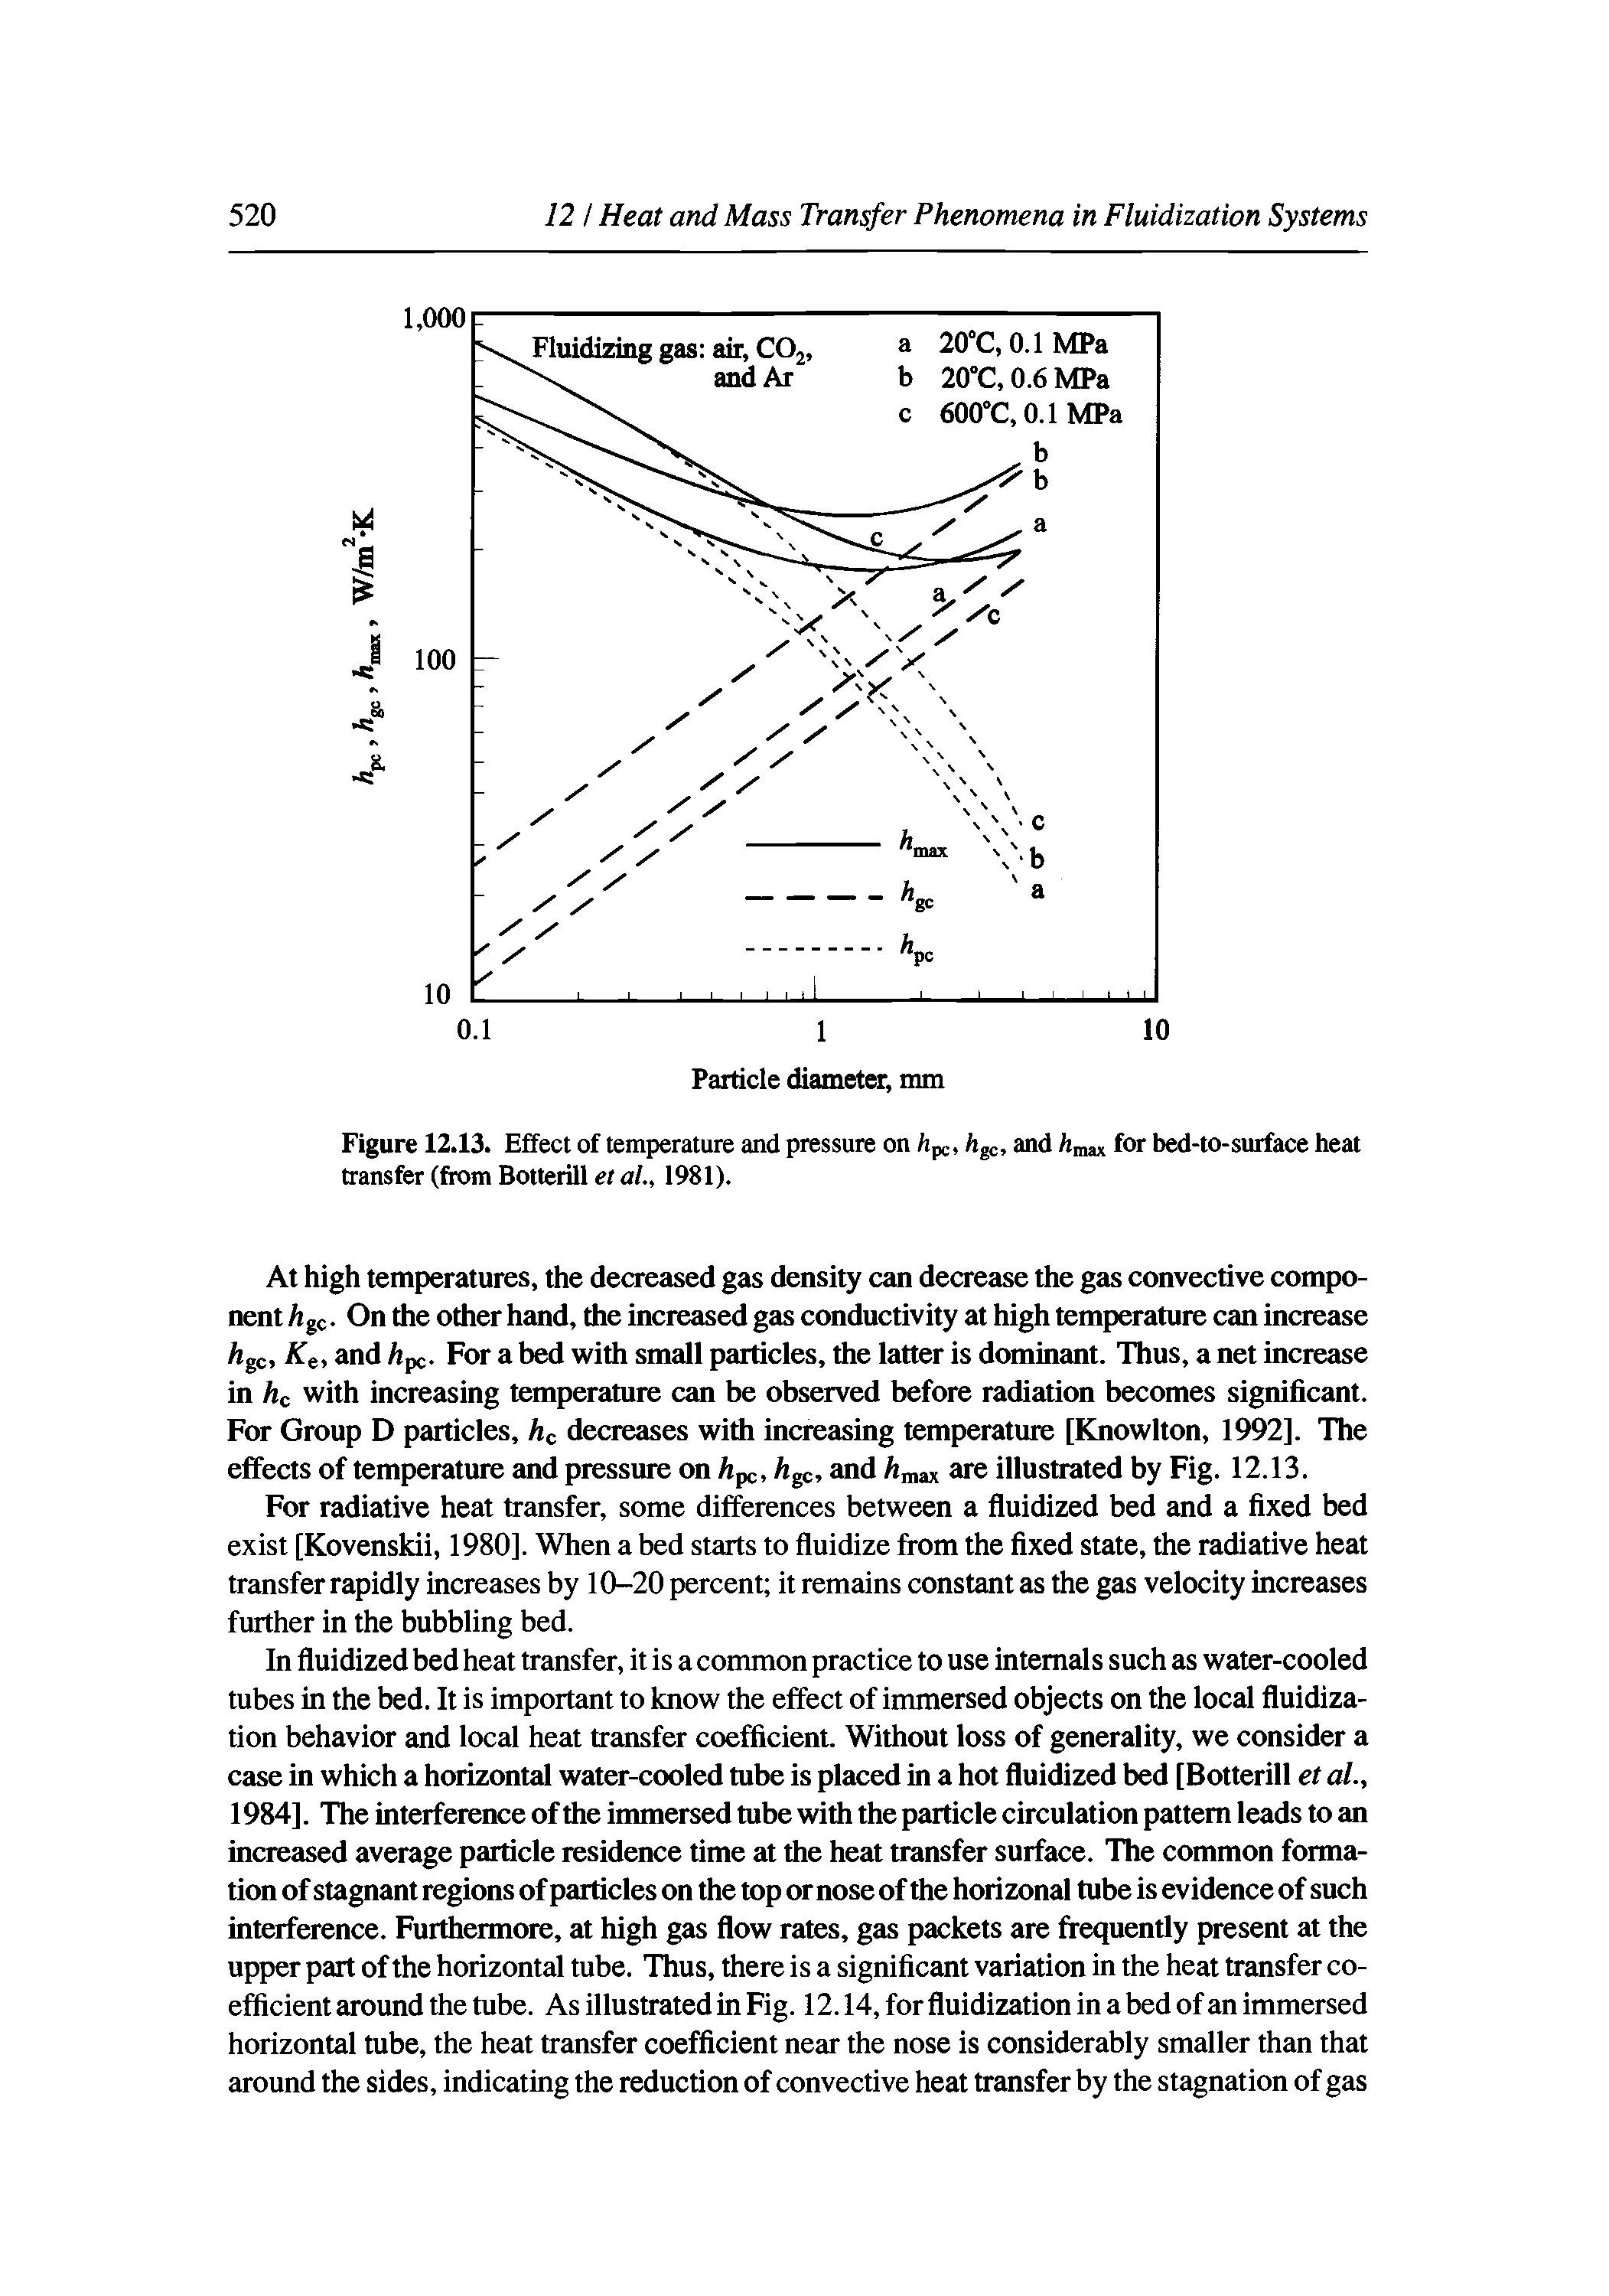 Figure 12.13. Effect of temperature and pressure on h, hgc, and hmm for bed-to-surface heat transfer (from Botterill et al., 1981).